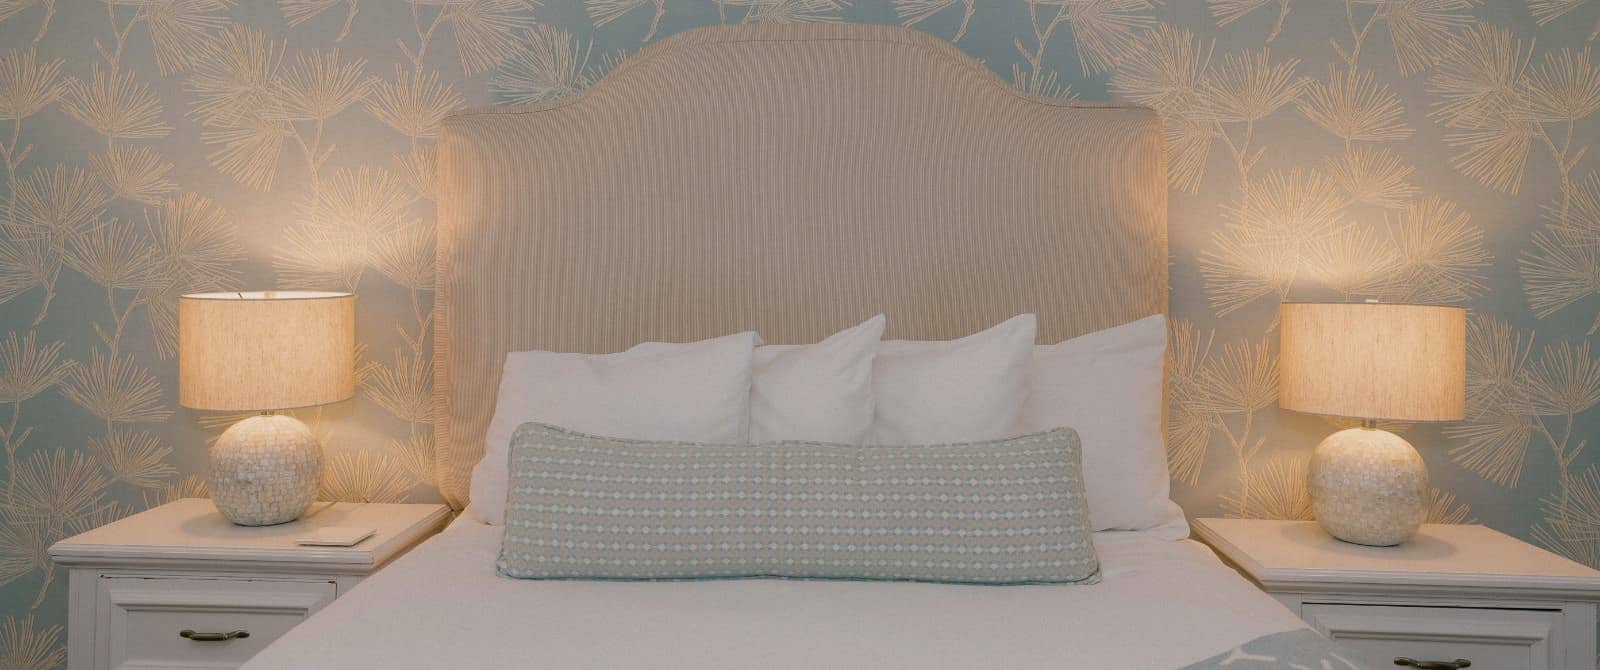 Close up view of bed with light tan upholstered headboard, white bedding, light blue and green patterned long pillow, white side tables, and lighted lamps